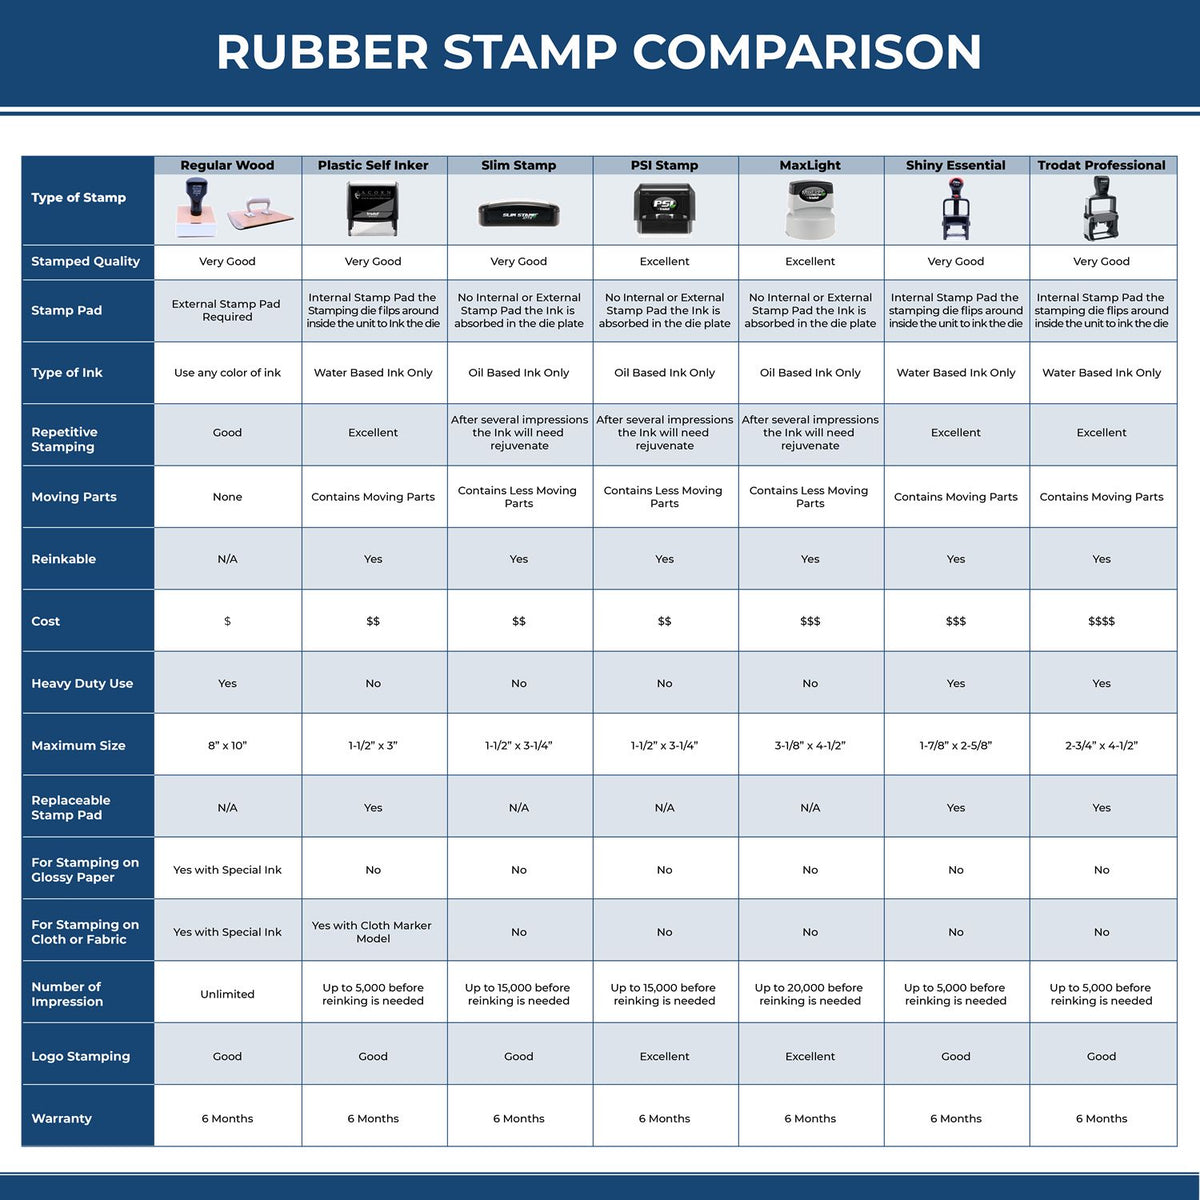 A comparison chart for the different types of mount models available for the Self-Inking West Virginia PE Stamp.